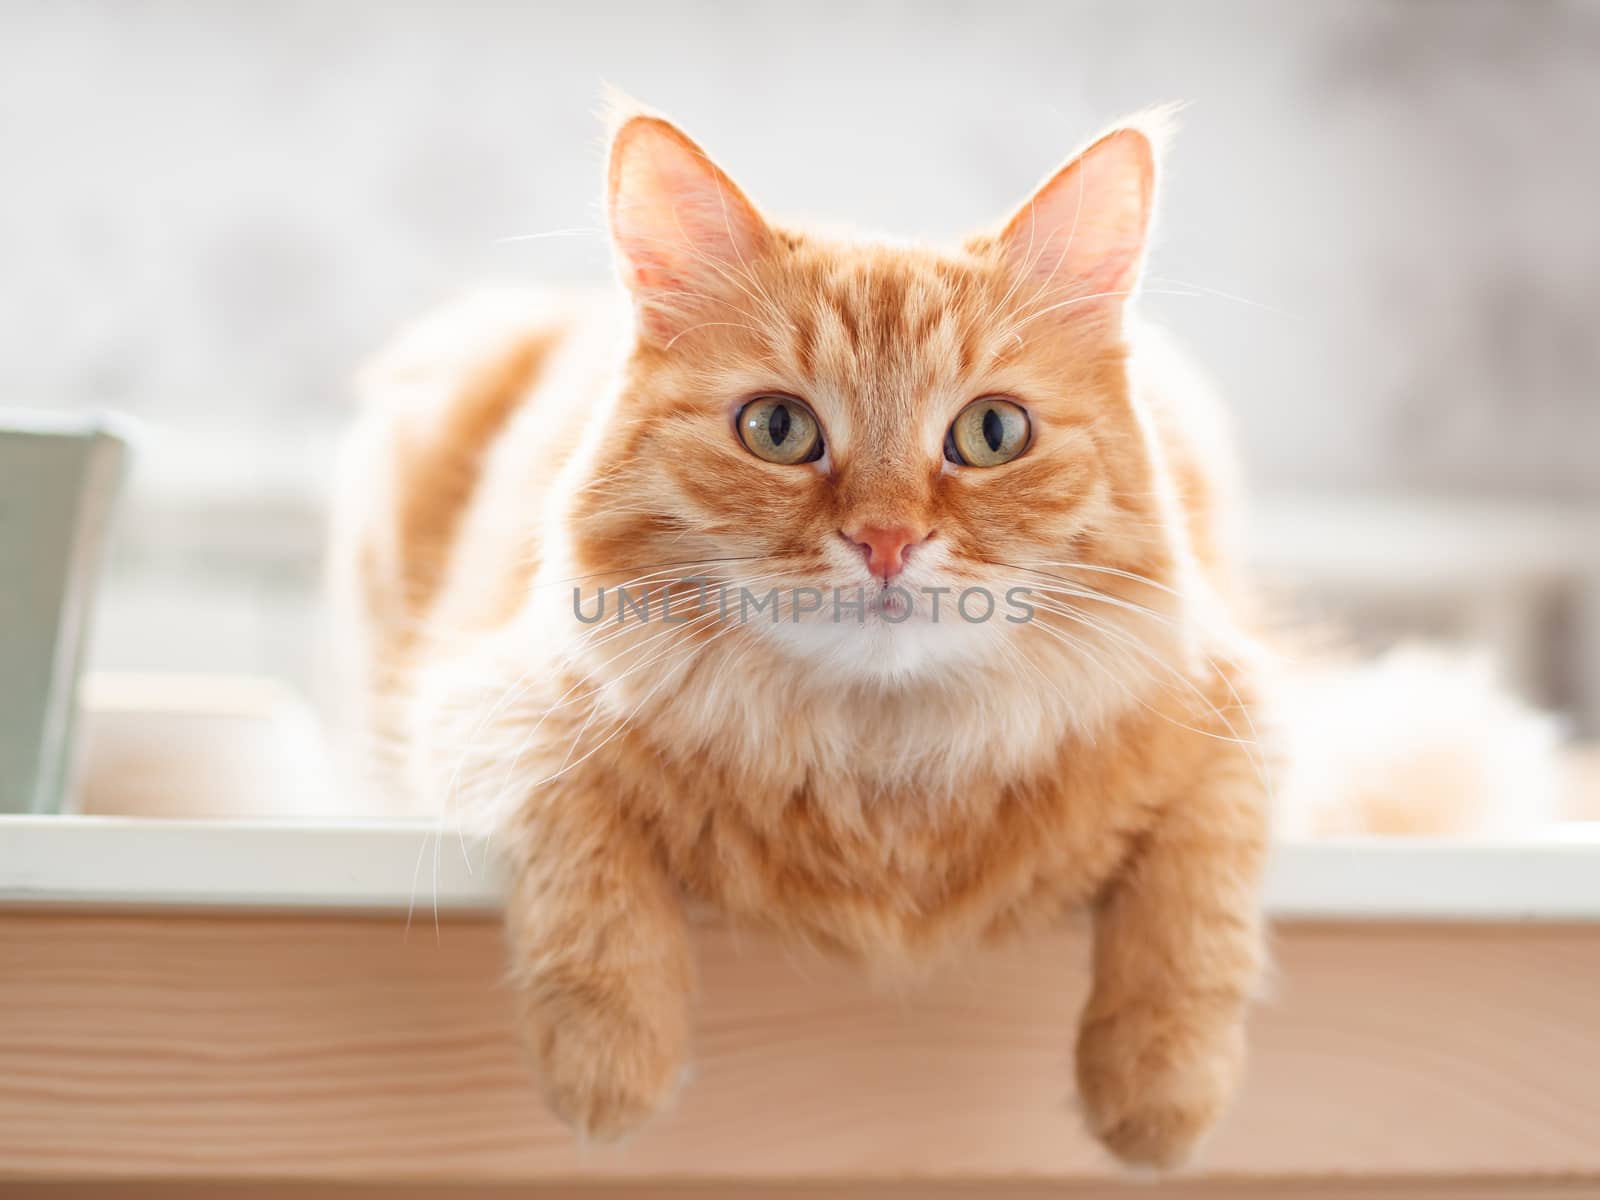 Close up portrait of cute ginger cat. Fluffy pet is staring in camera. Domestic kitty sitting on table.